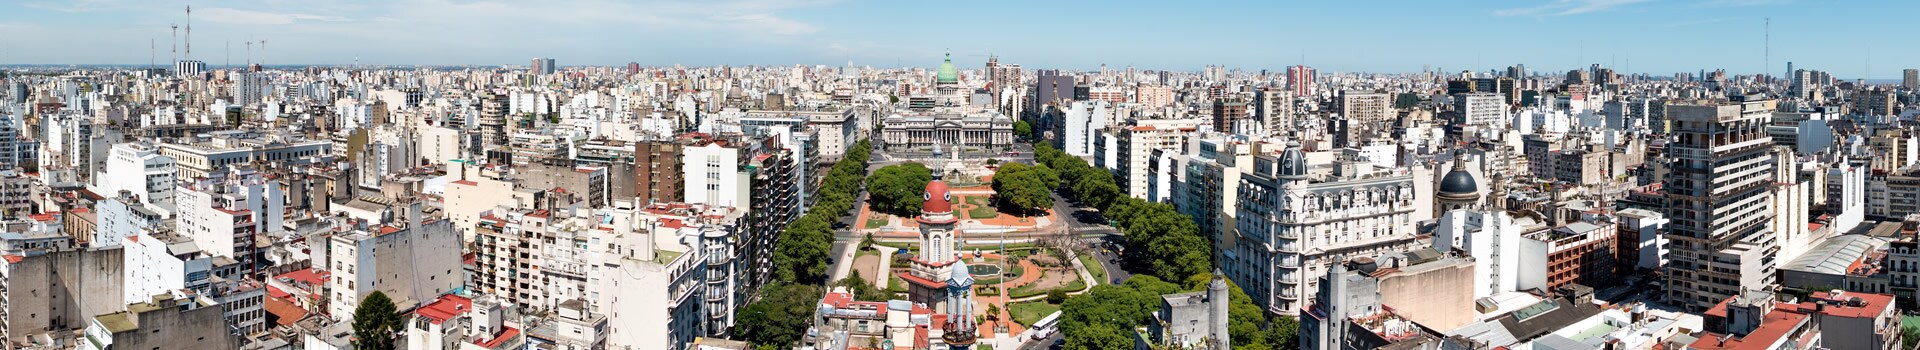 Madrid - Buenos aires intl